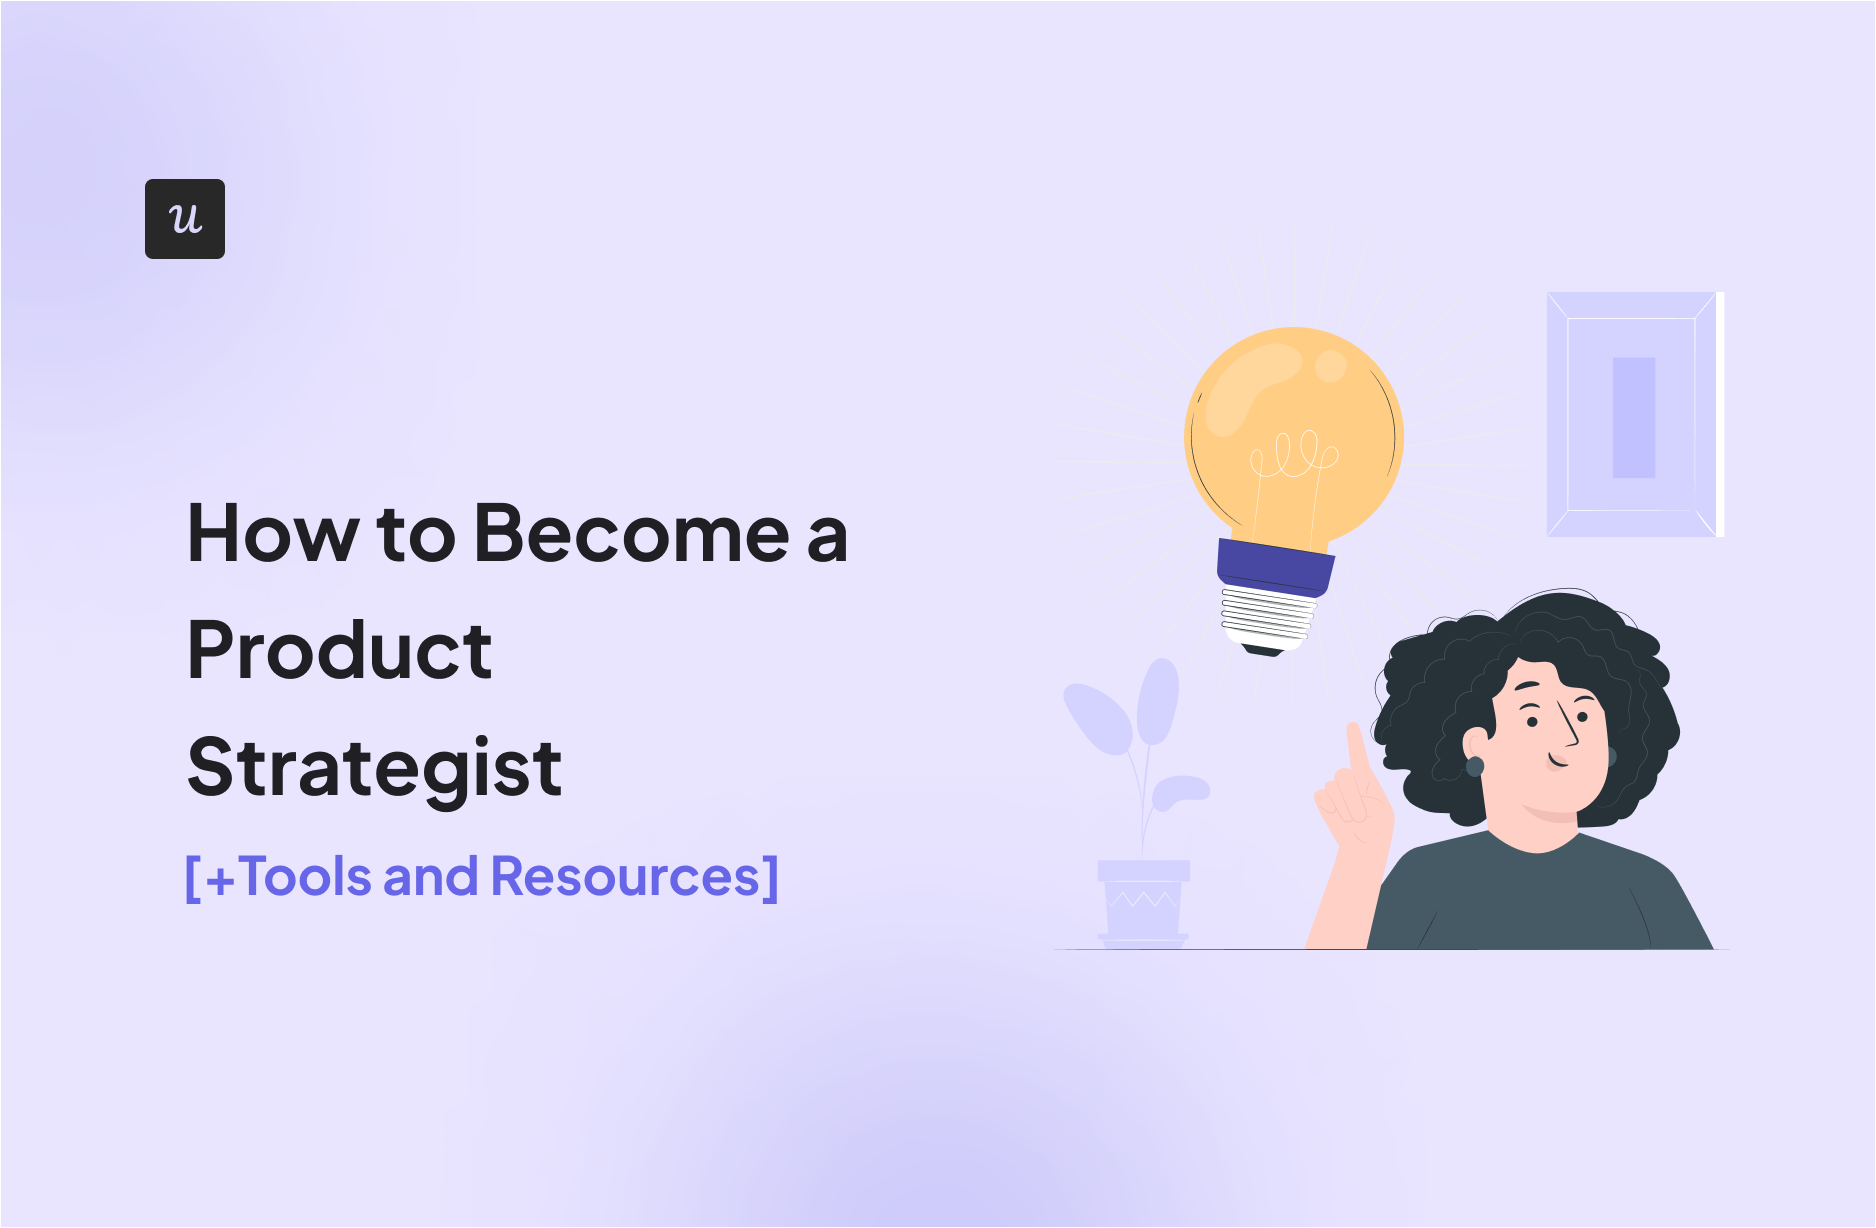 How to Become a Product Strategist [+Tools and Resources]